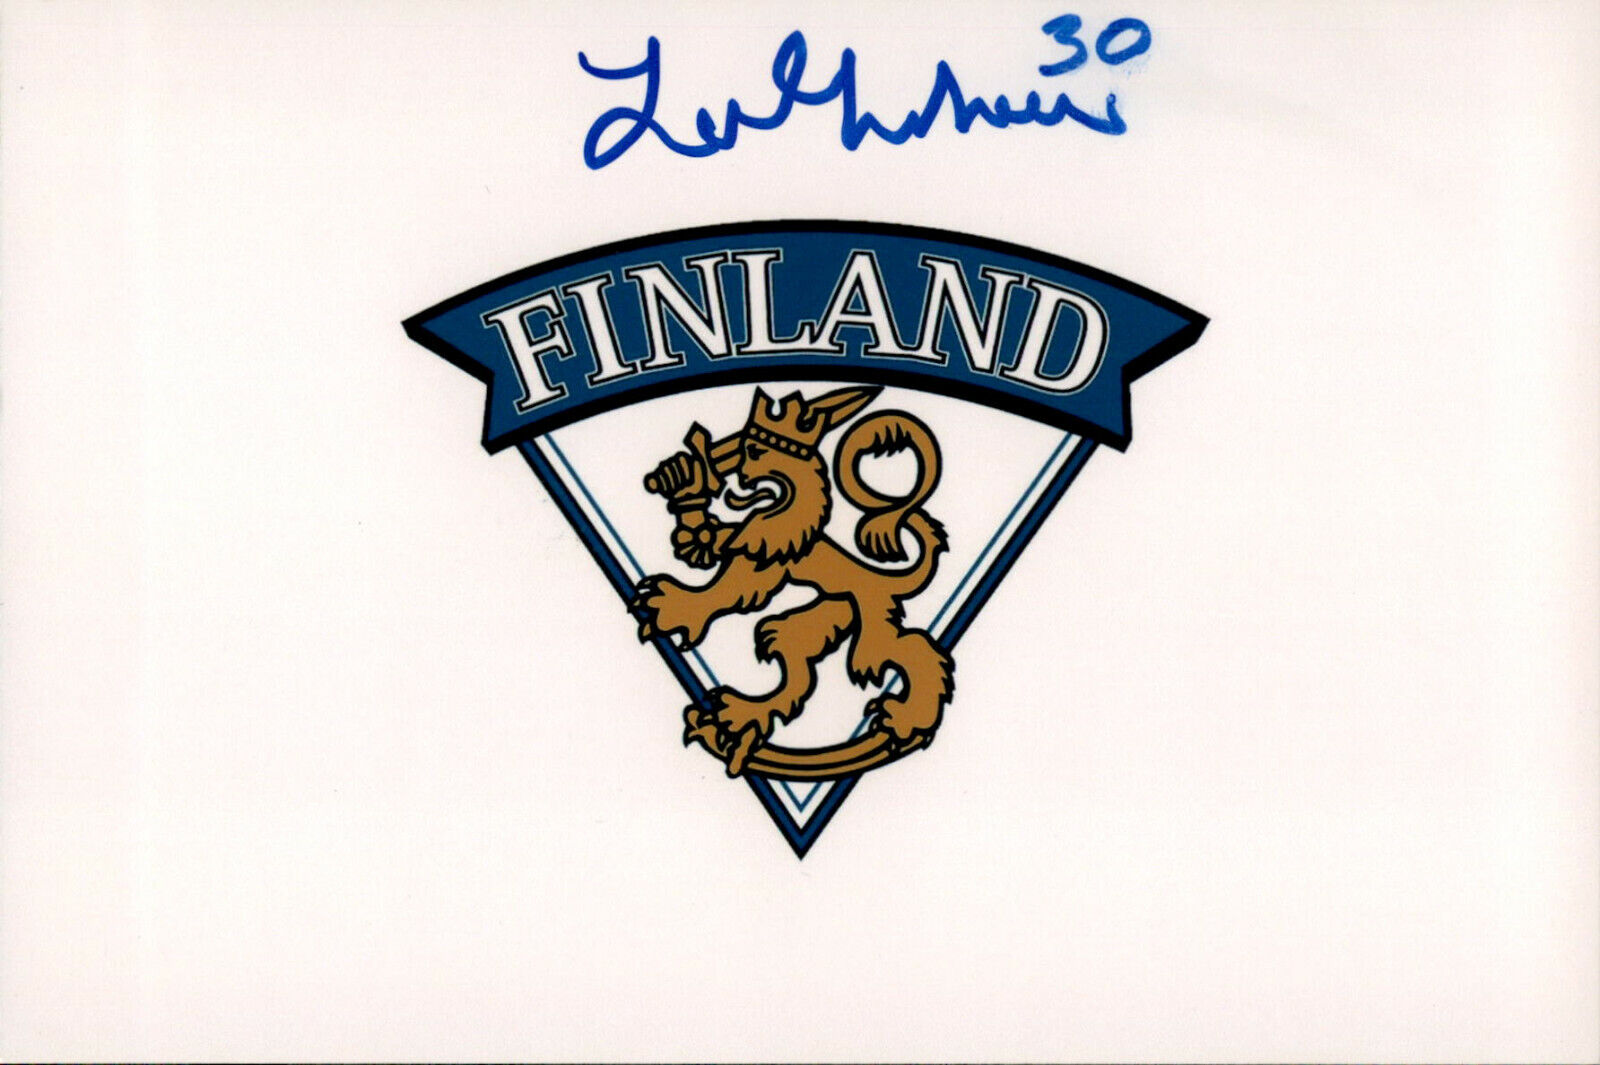 Jere Huhtamaa SIGNED 4x6 Photo Poster painting TEAM FINLAND